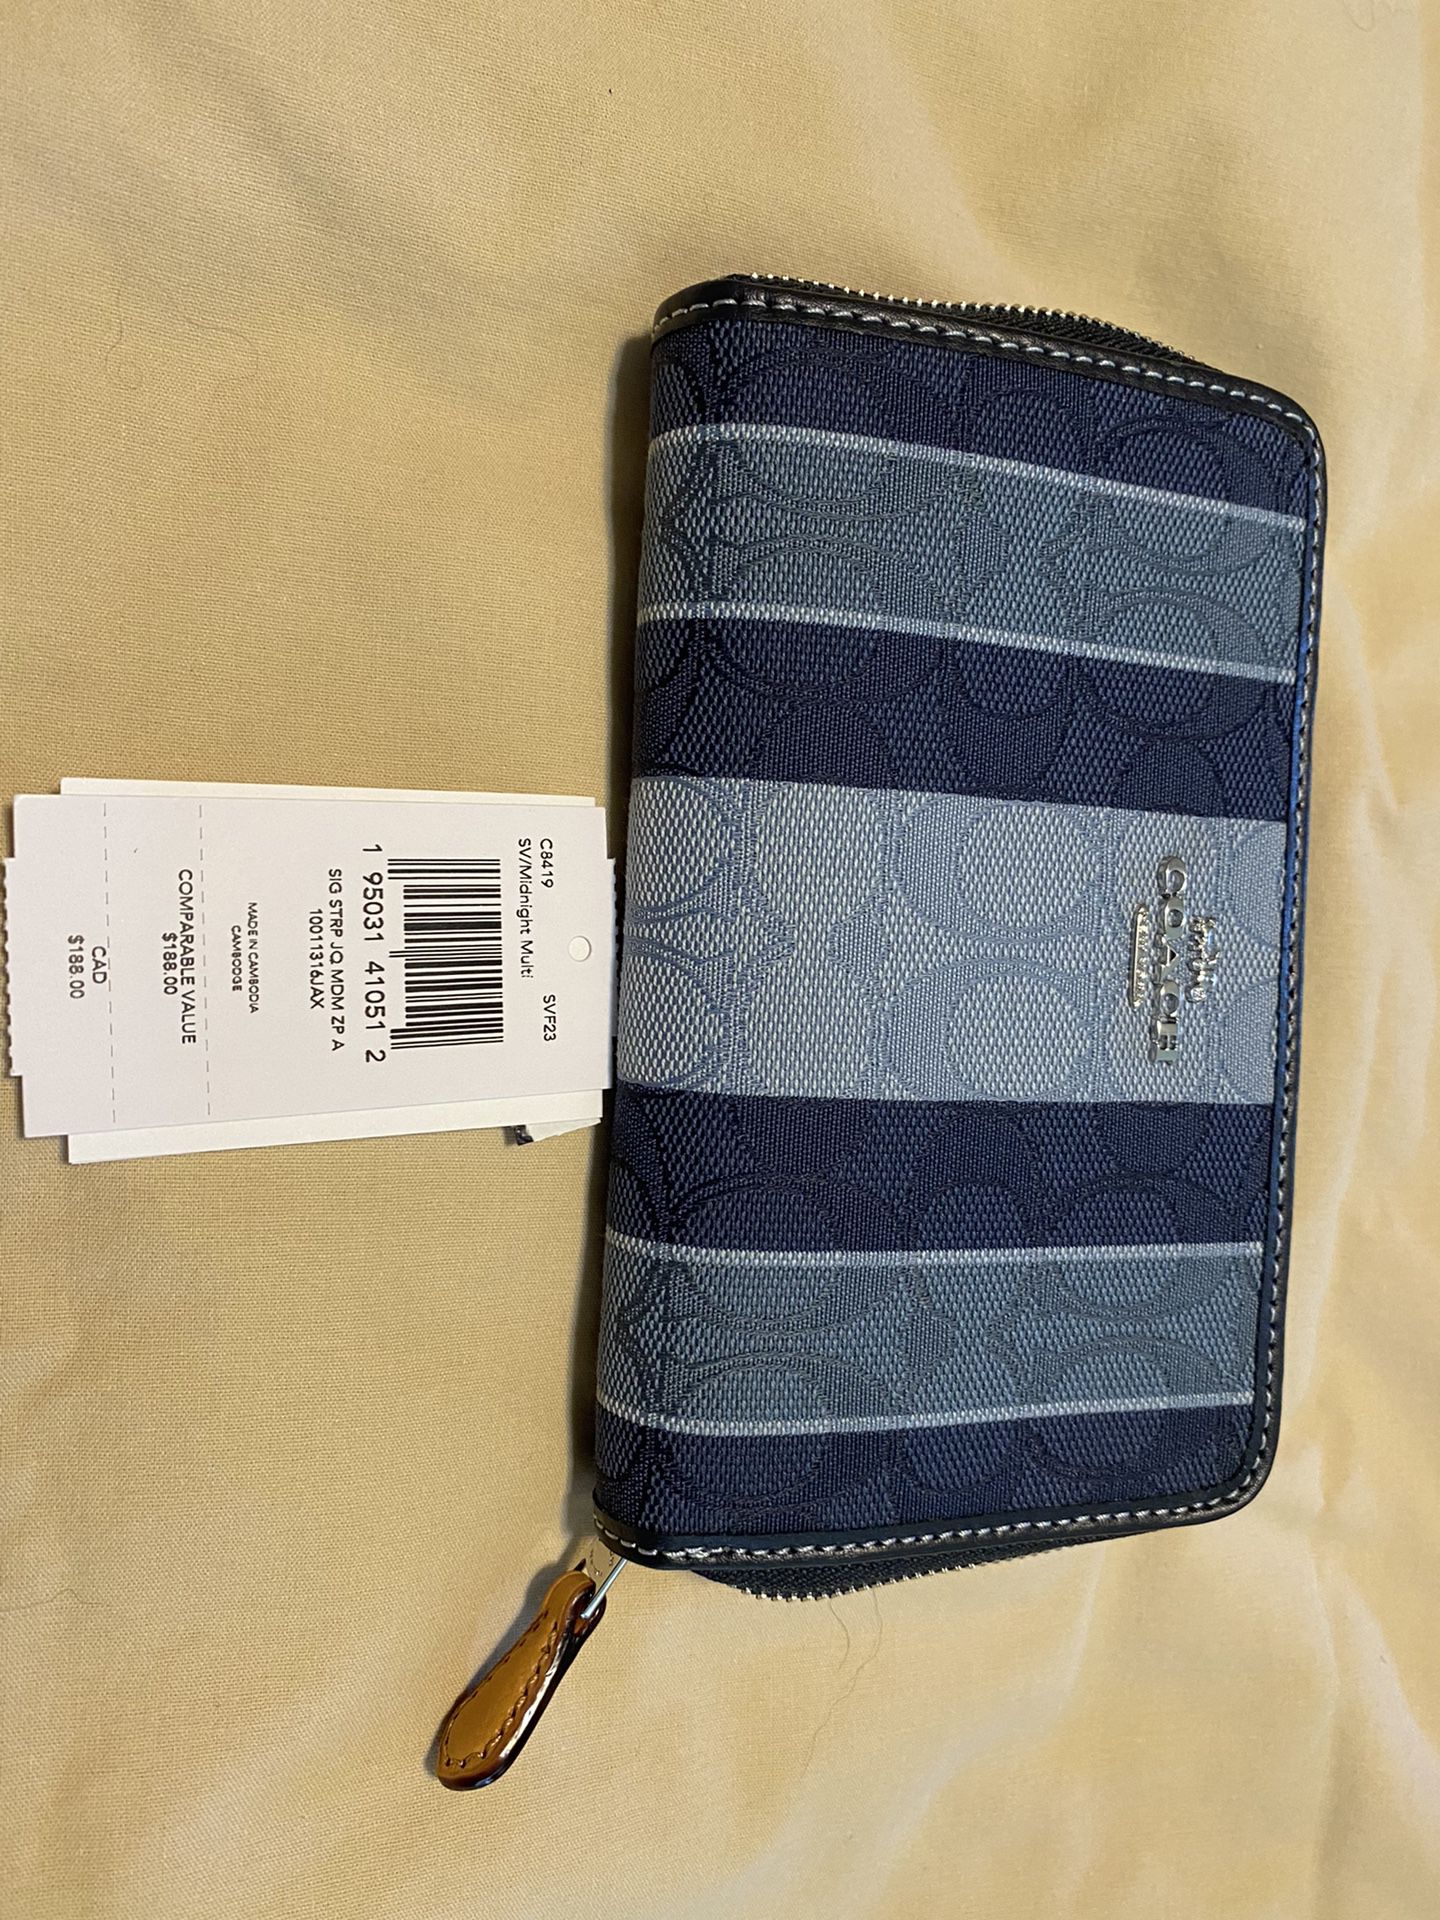 Authentic  Coach Wallet  Never Used   No Trades   Cash Only  Price Is Firm